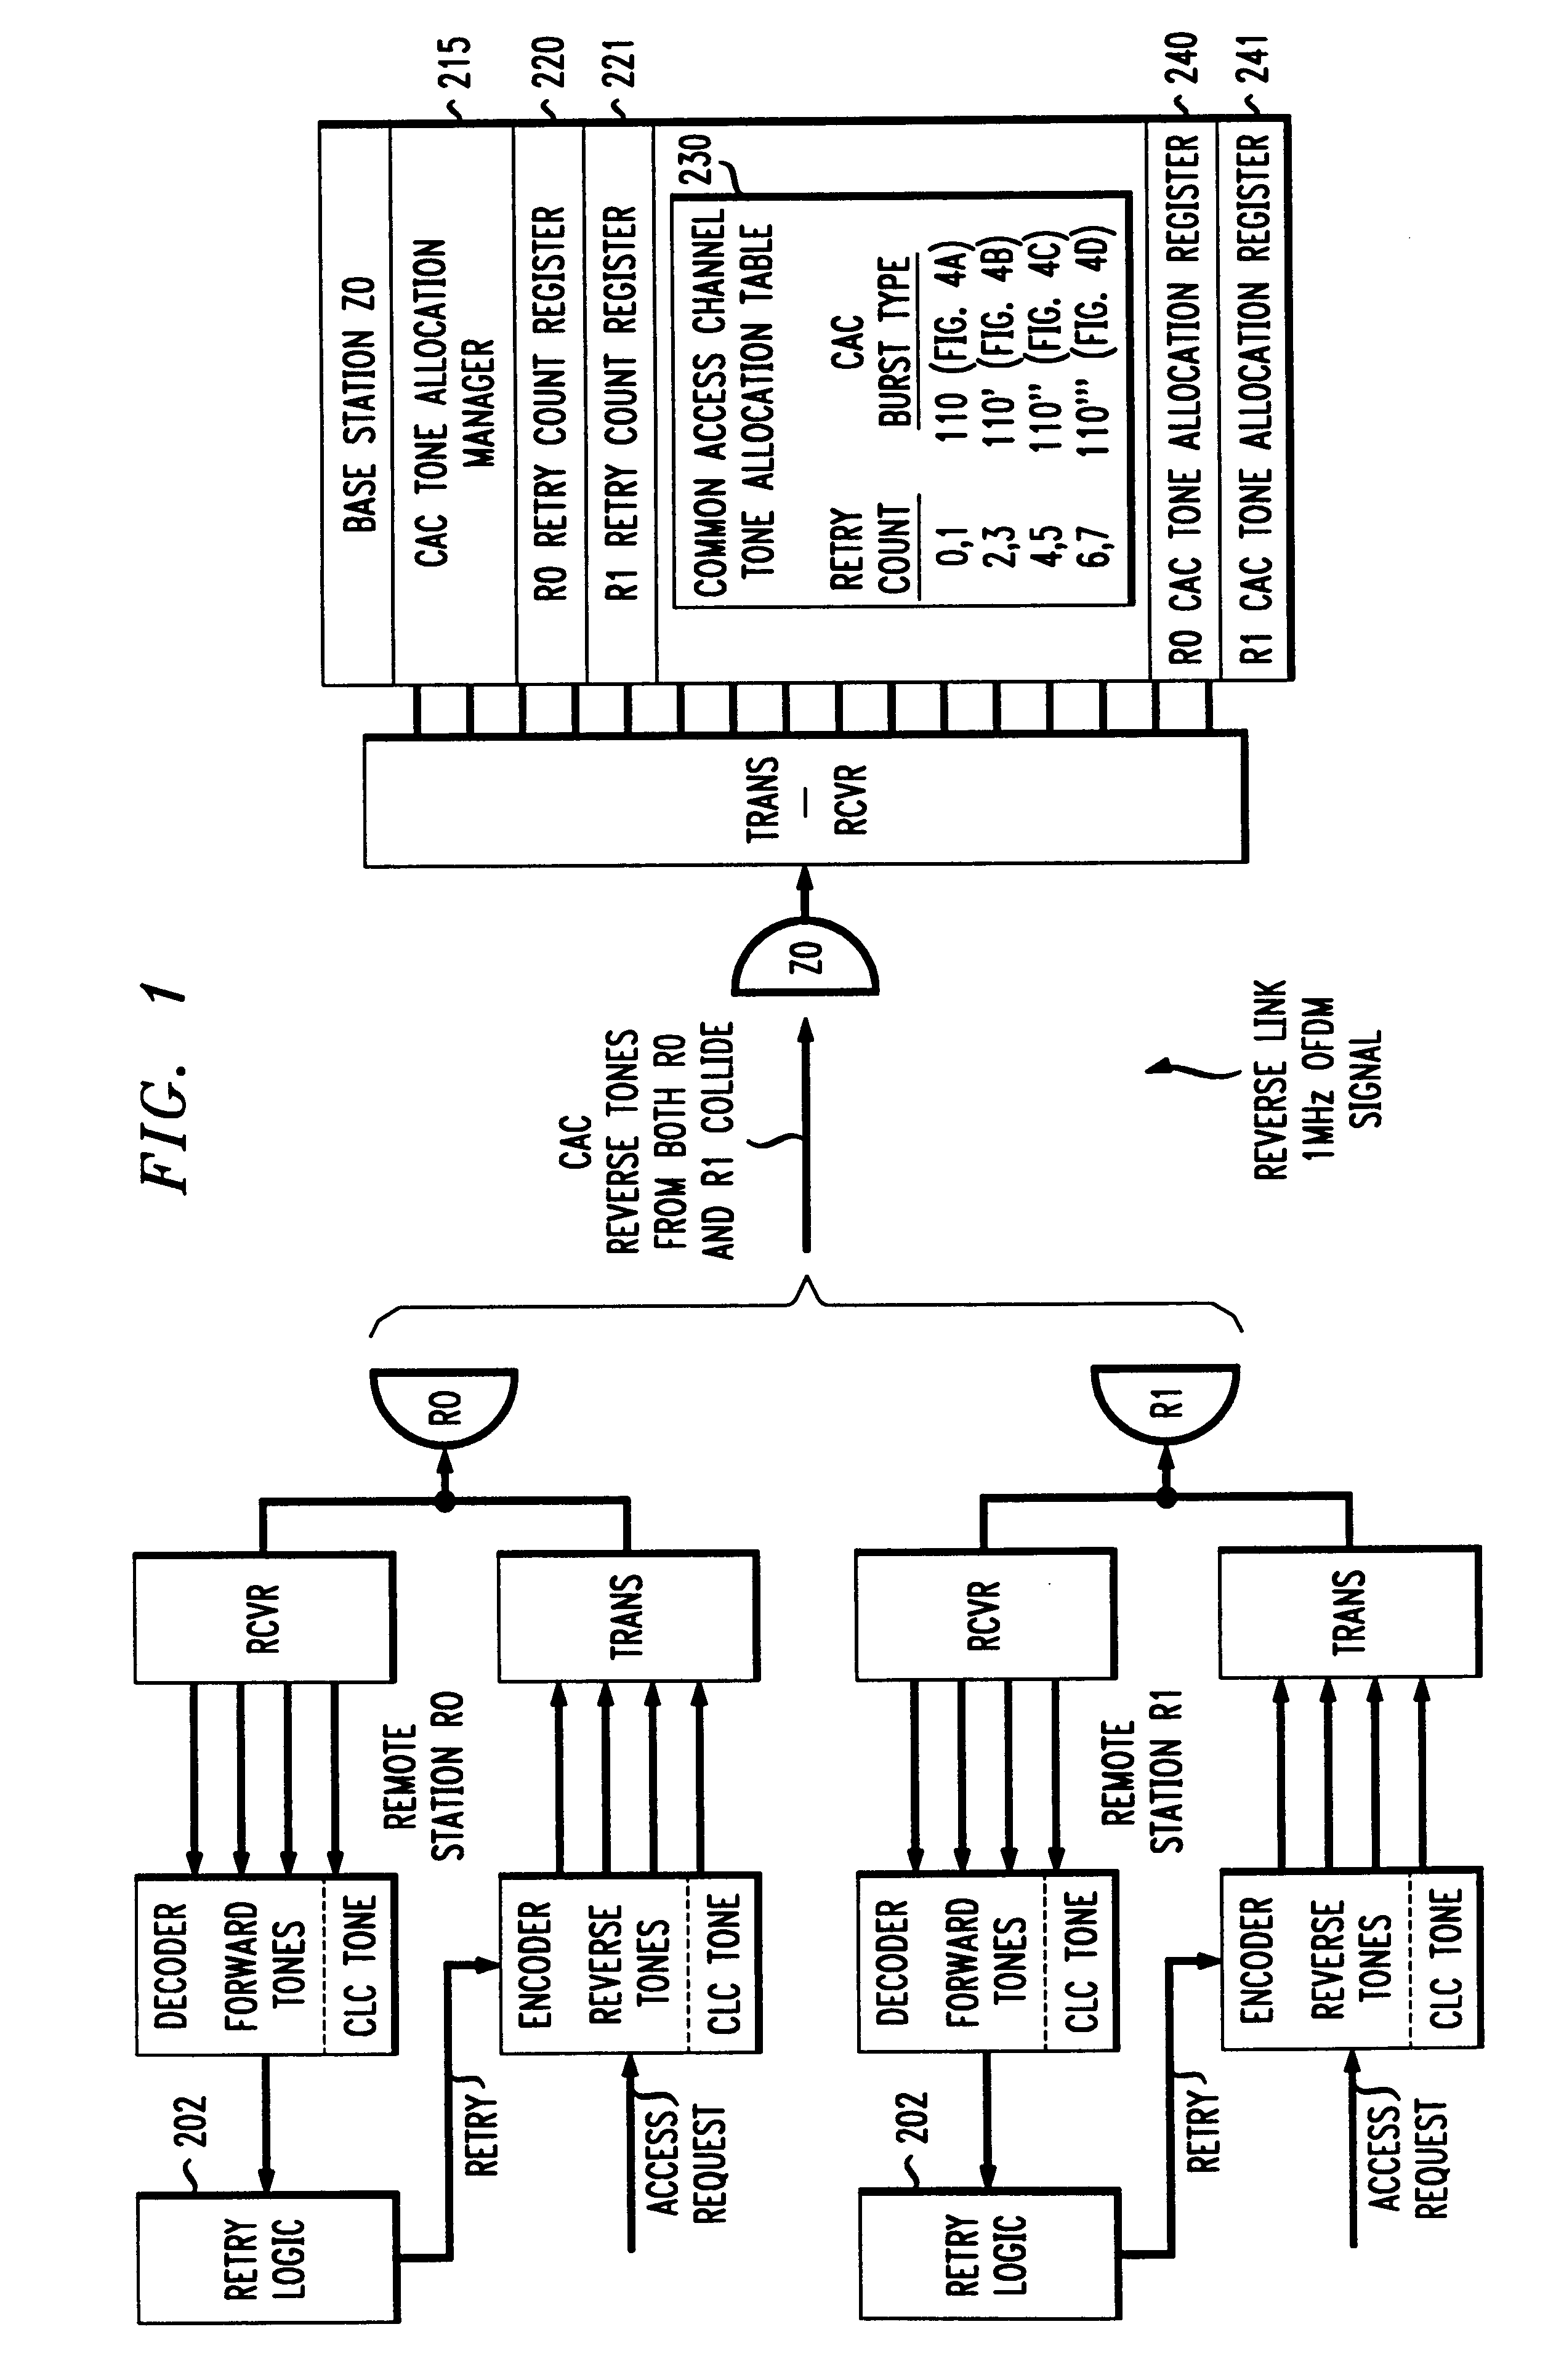 Access retry method for shared channel wireless communications links